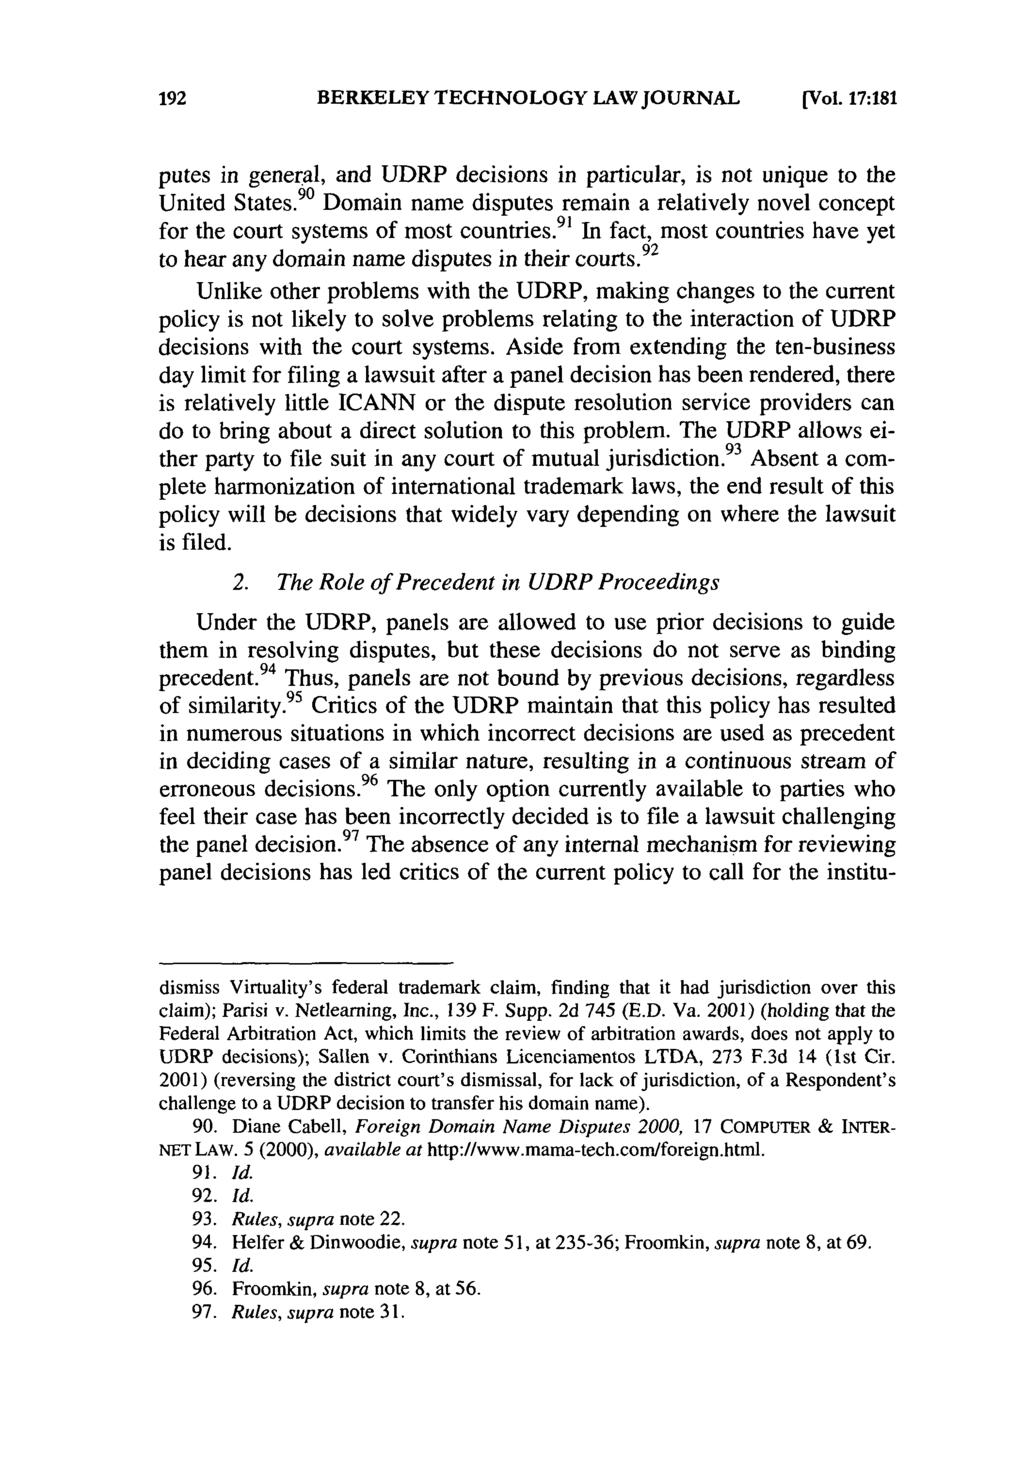 BERKELEY TECHNOLOGY LAW JOURNAL (Vol. 17:181 putes in general, and UDRP decisions in particular, is not unique to the United States.